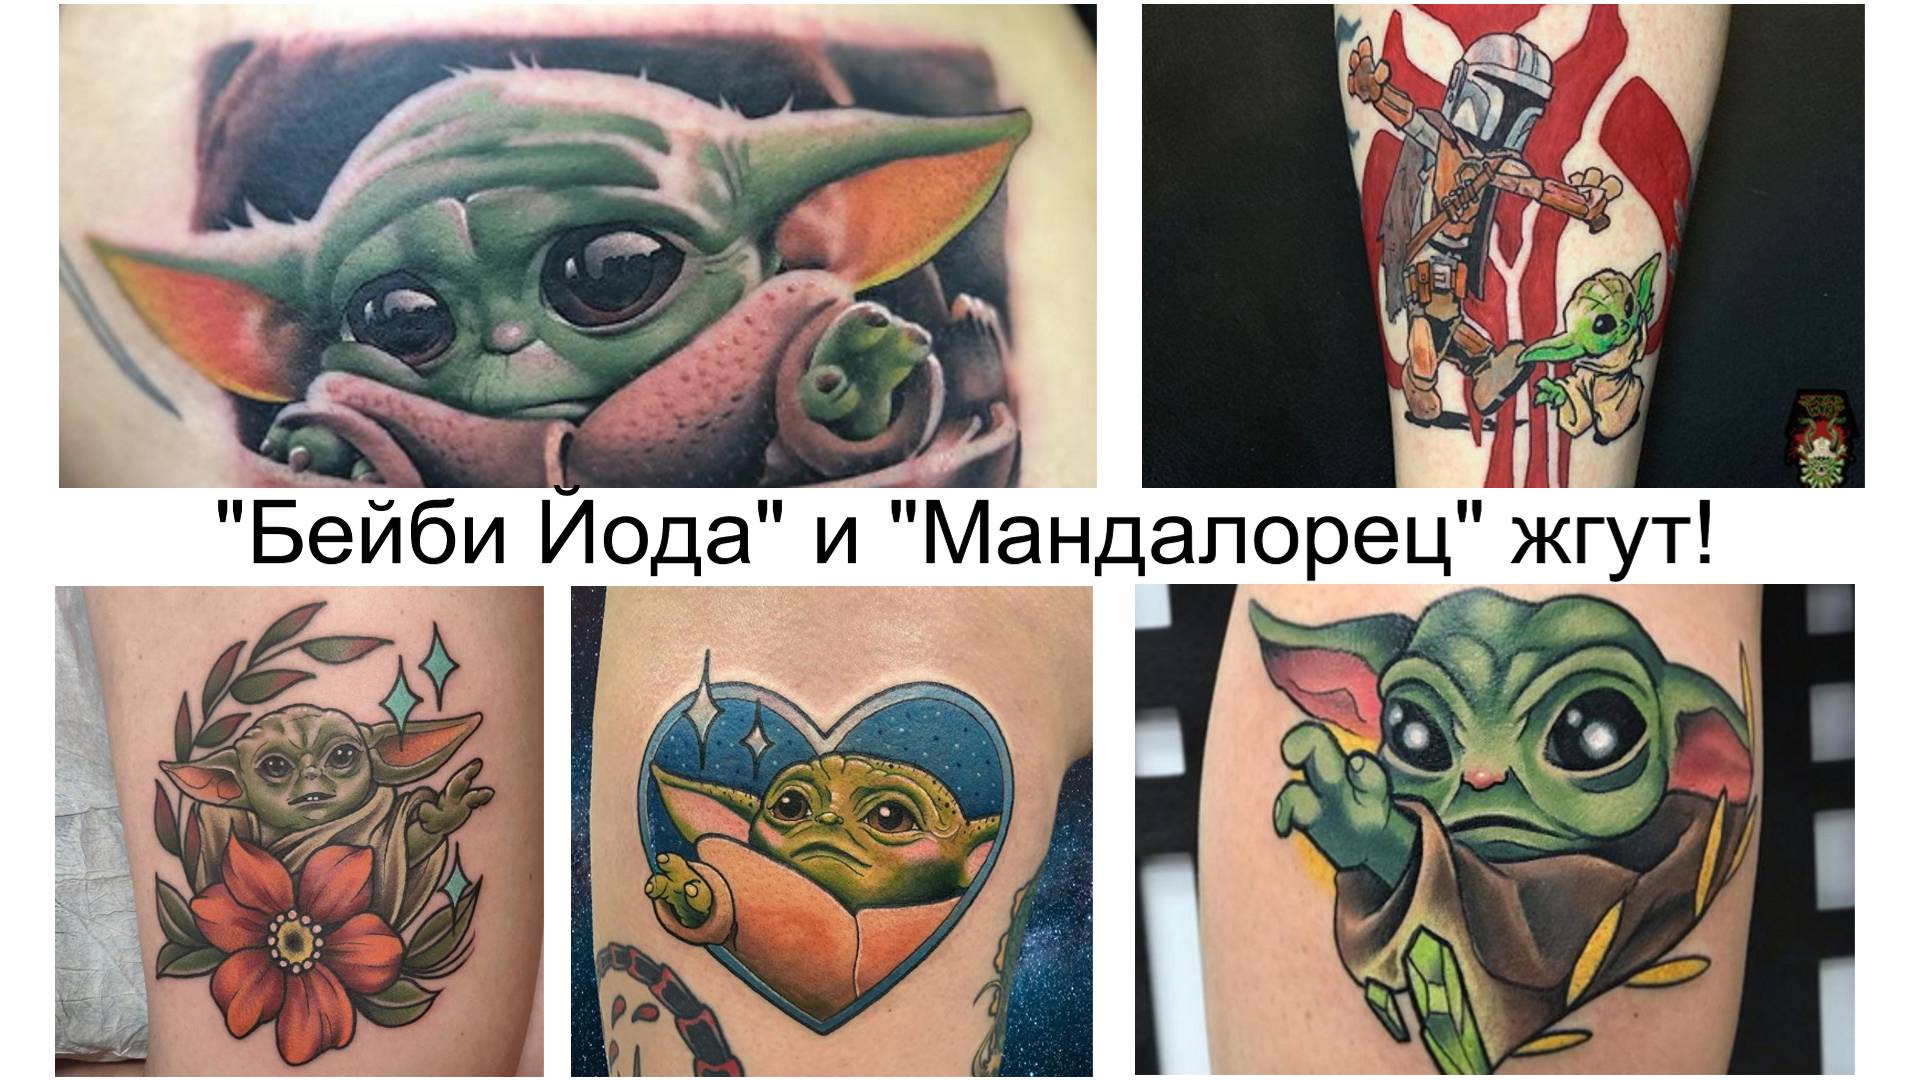 Star Wars The Mandalorian Man gets tattoo of Baby Yoda drinking alcohol   indy100  indy100